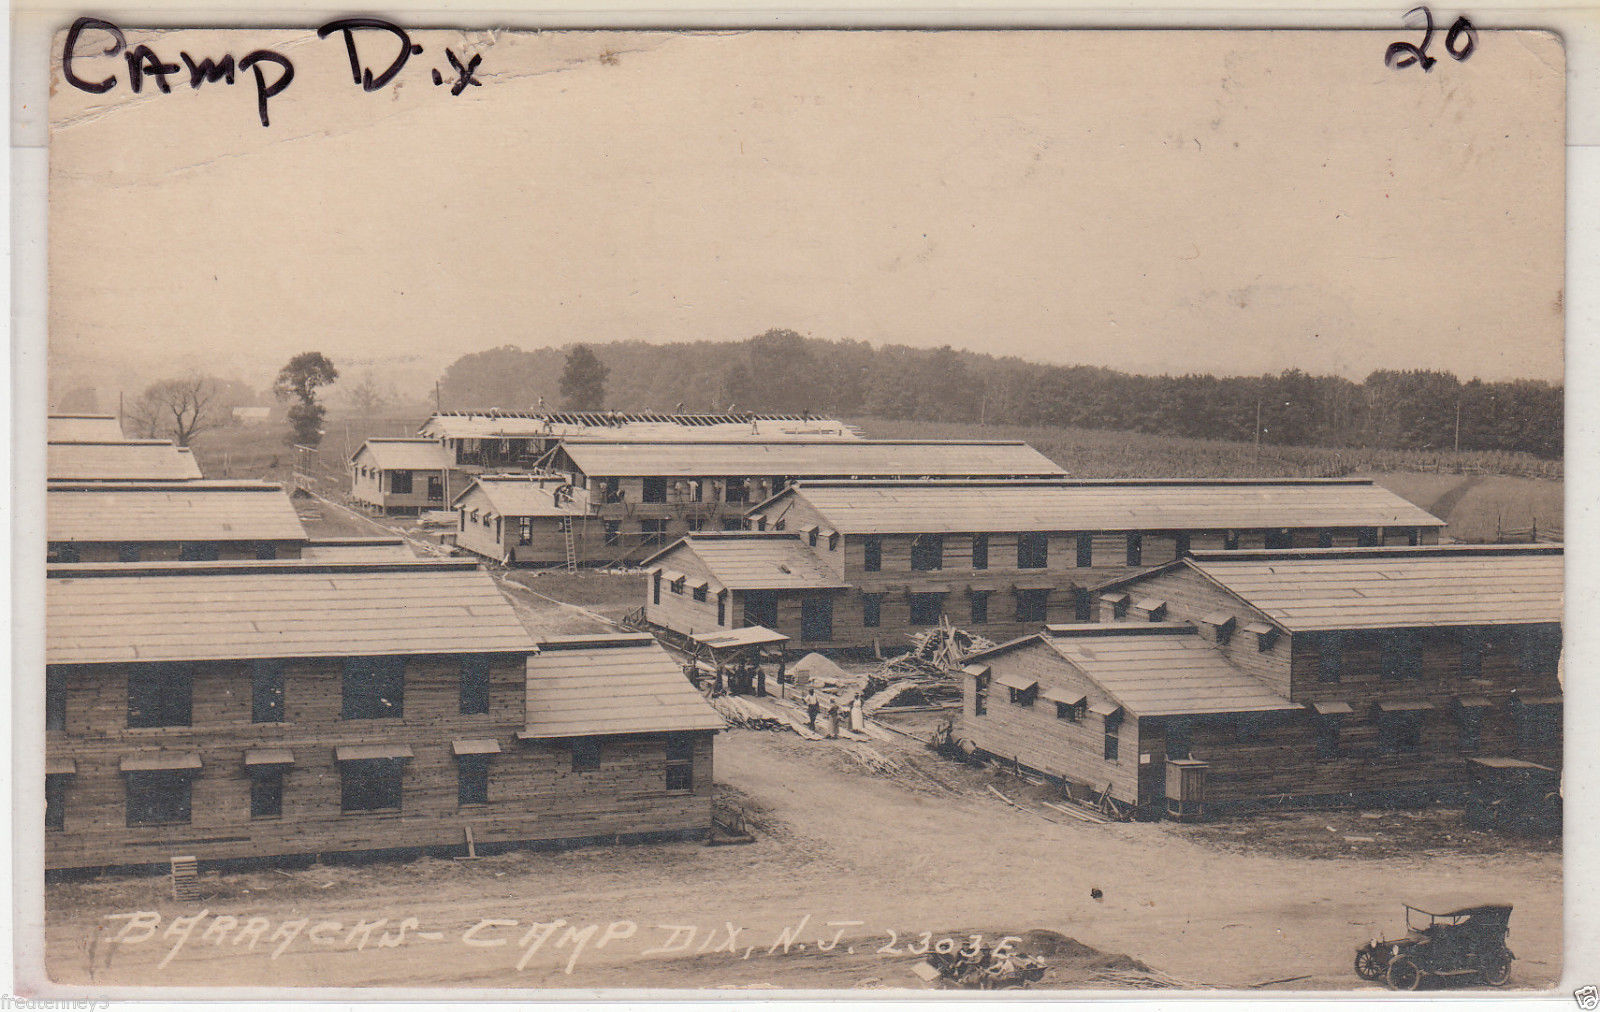 Camp Dix - Buildings at Camp Dix with the Pine Barrens right beyond - c 1917-18